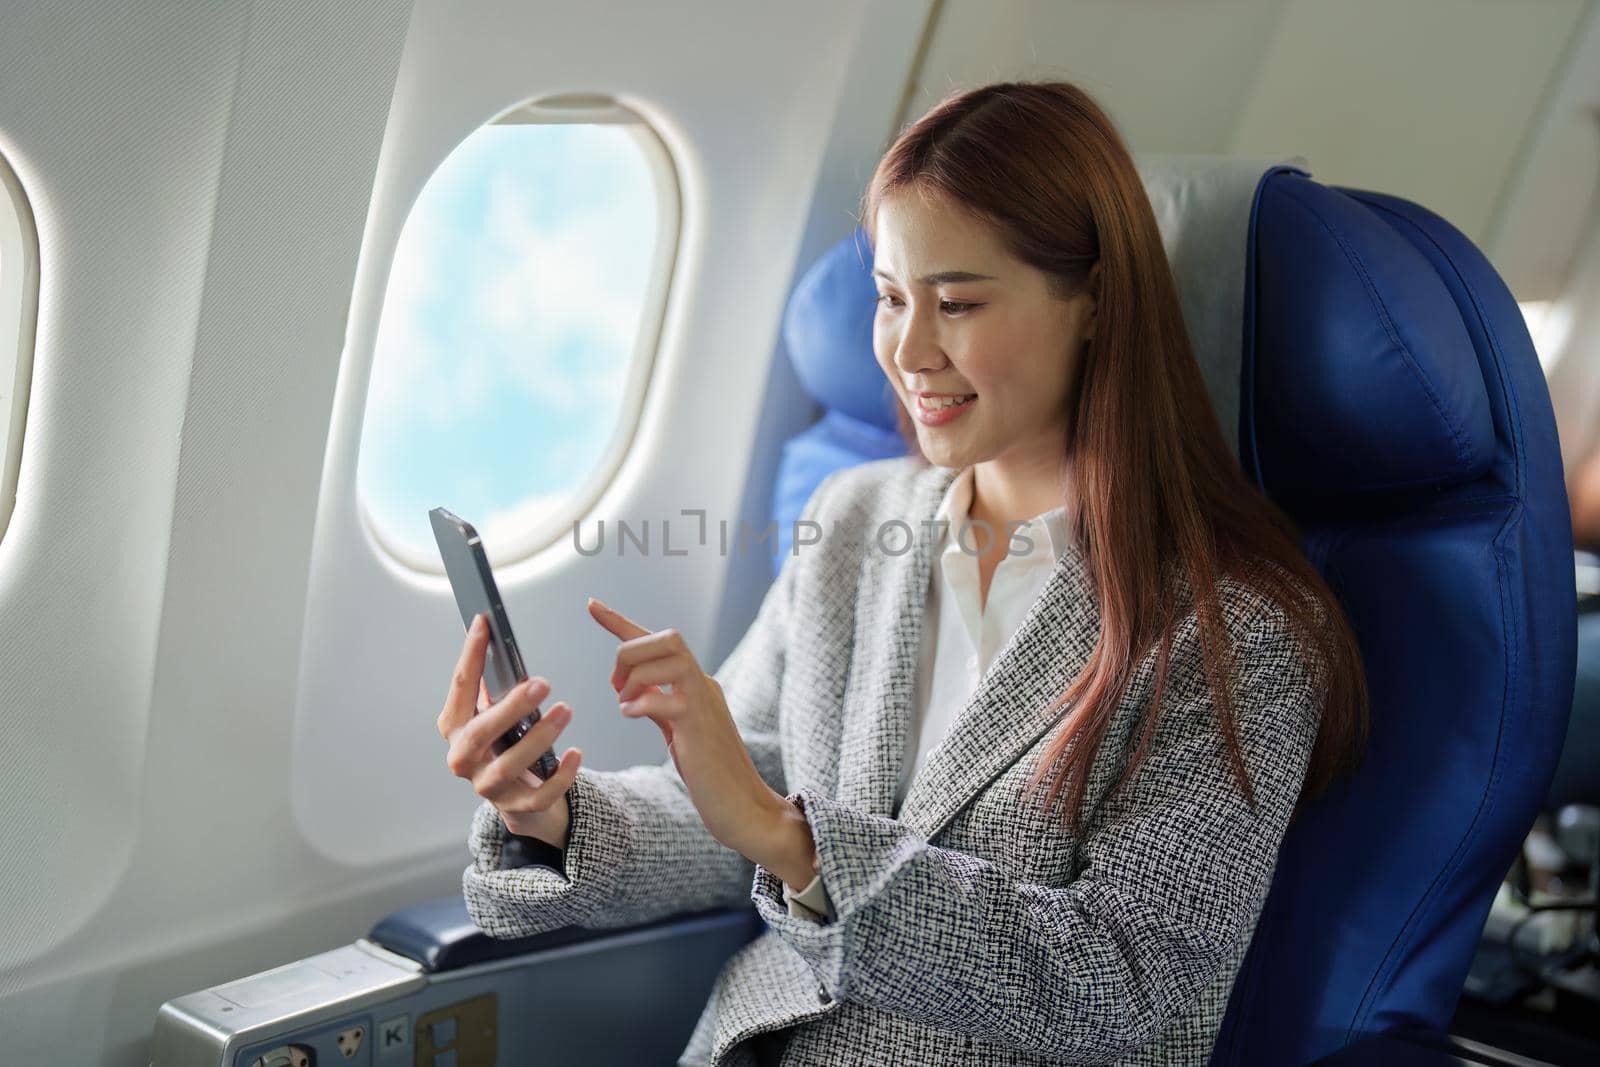 A portrait of a smiling Asian businesswoman using her phone while on a plane.